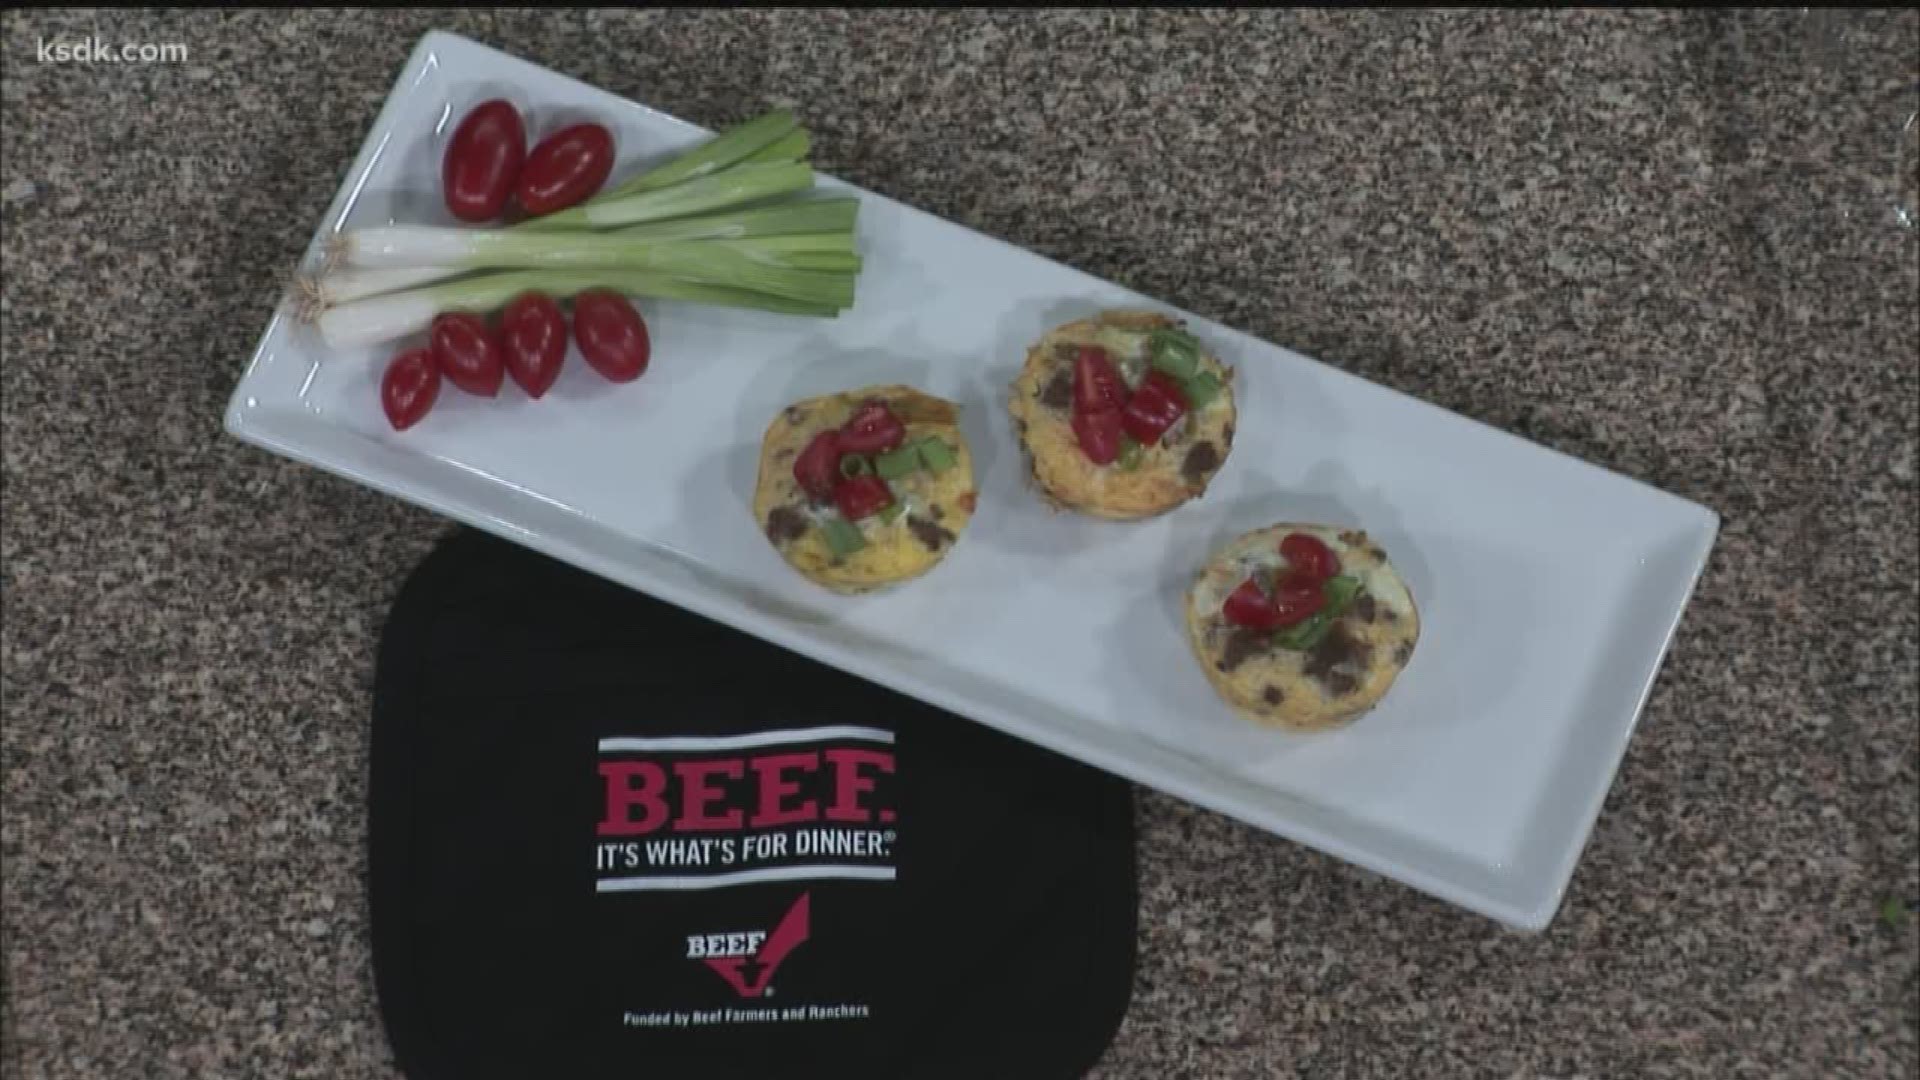 This recipe demonstrated by Jaelyn Peckman of Missouri Beef Council makes a great breakfast on-the-go.